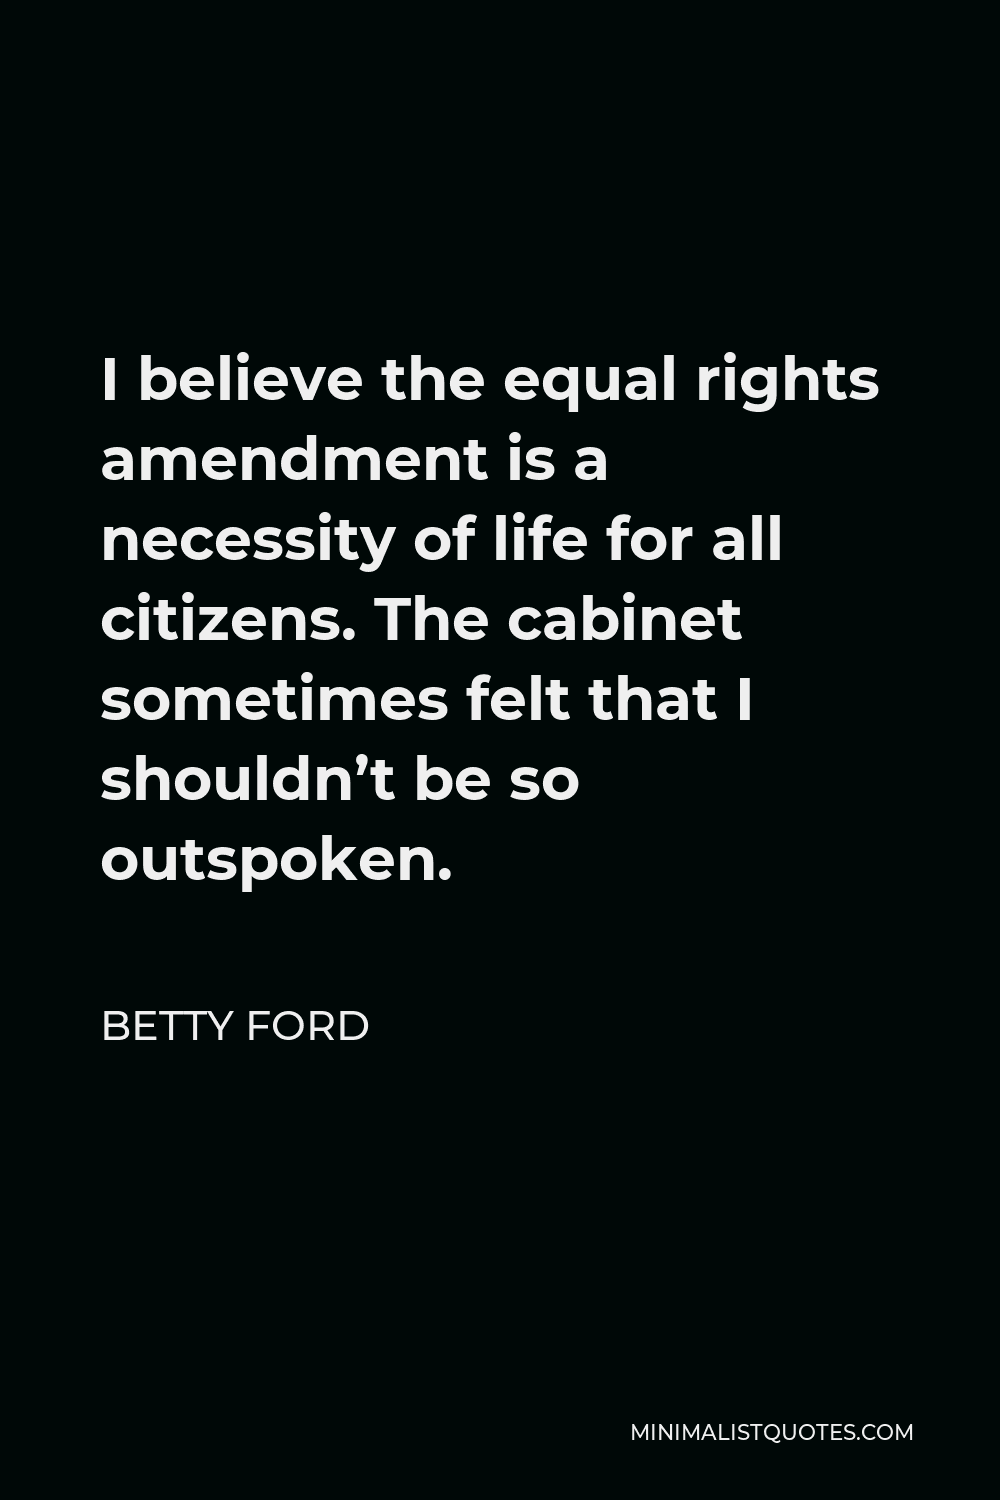 Betty Ford Quote - I believe the equal rights amendment is a necessity of life for all citizens. The cabinet sometimes felt that I shouldn’t be so outspoken.